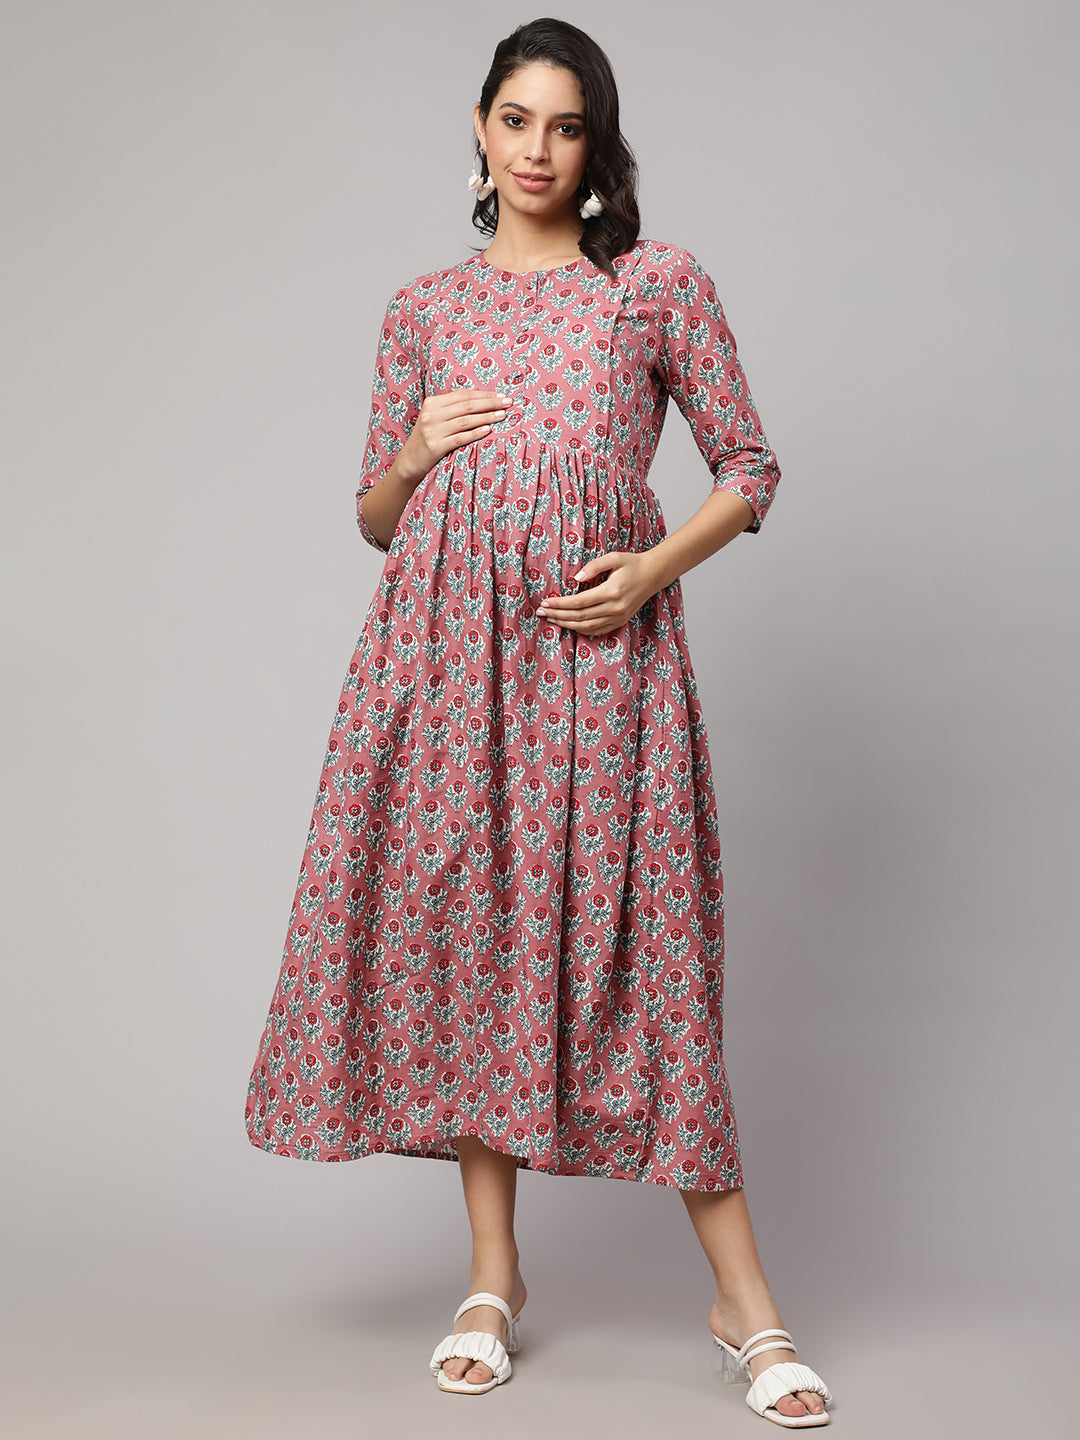 Women's Mauve Floral Printed Flared Maternity Dress - Nayo Clothing